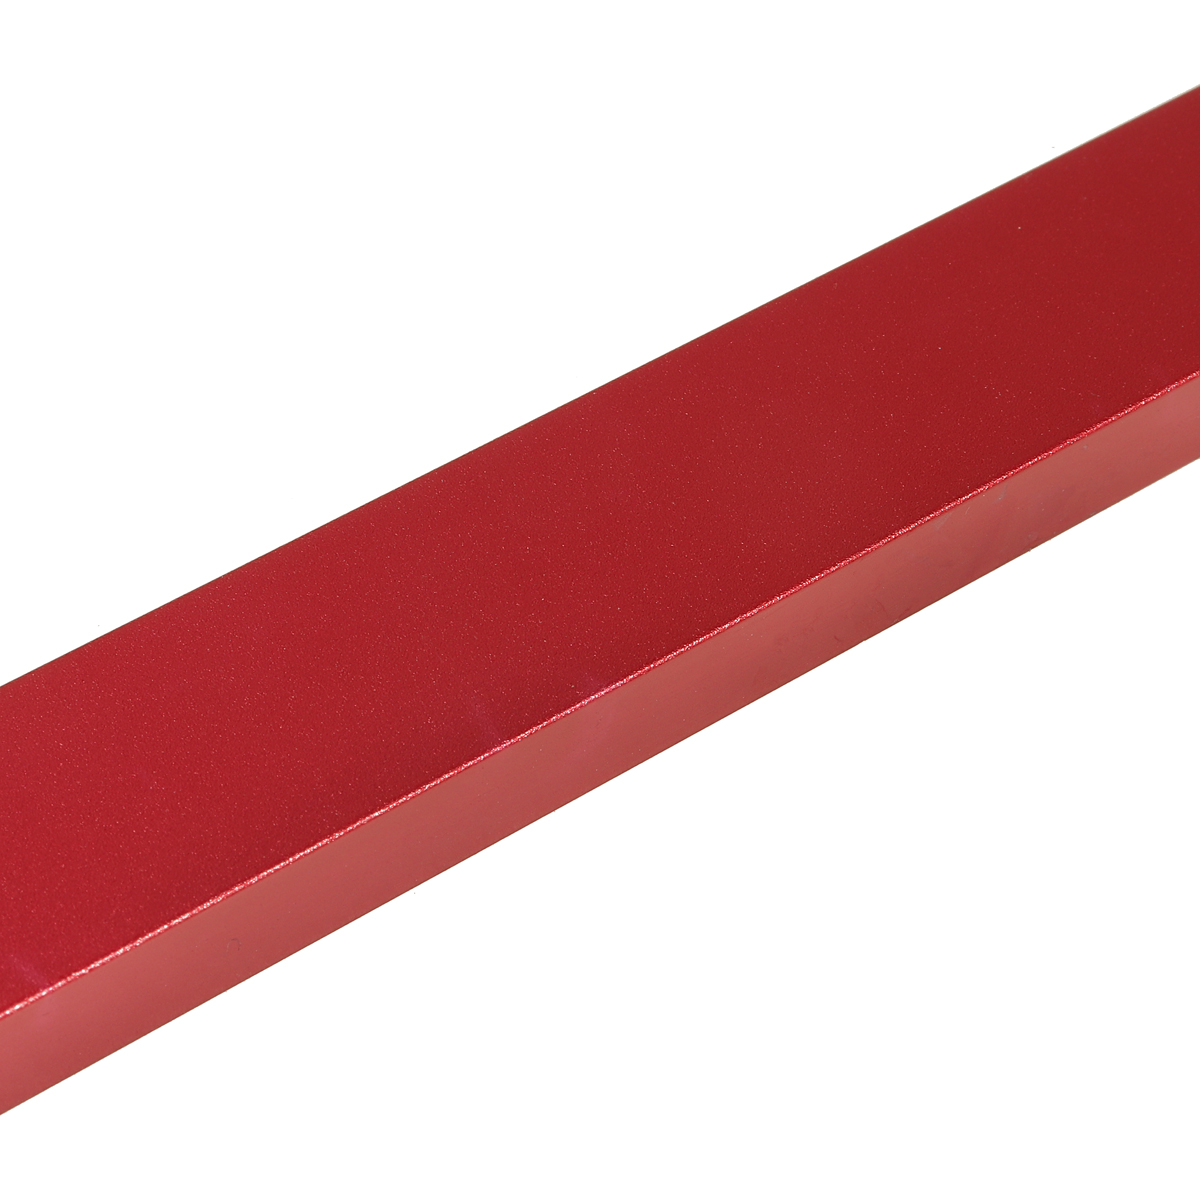 Red-Aluminum-Alloy-300-1220mm-T-track-T-slot-Miter-Track-Jig-T-Screw-Fixture-Slot-19x95mm-For-Table--1682608-10